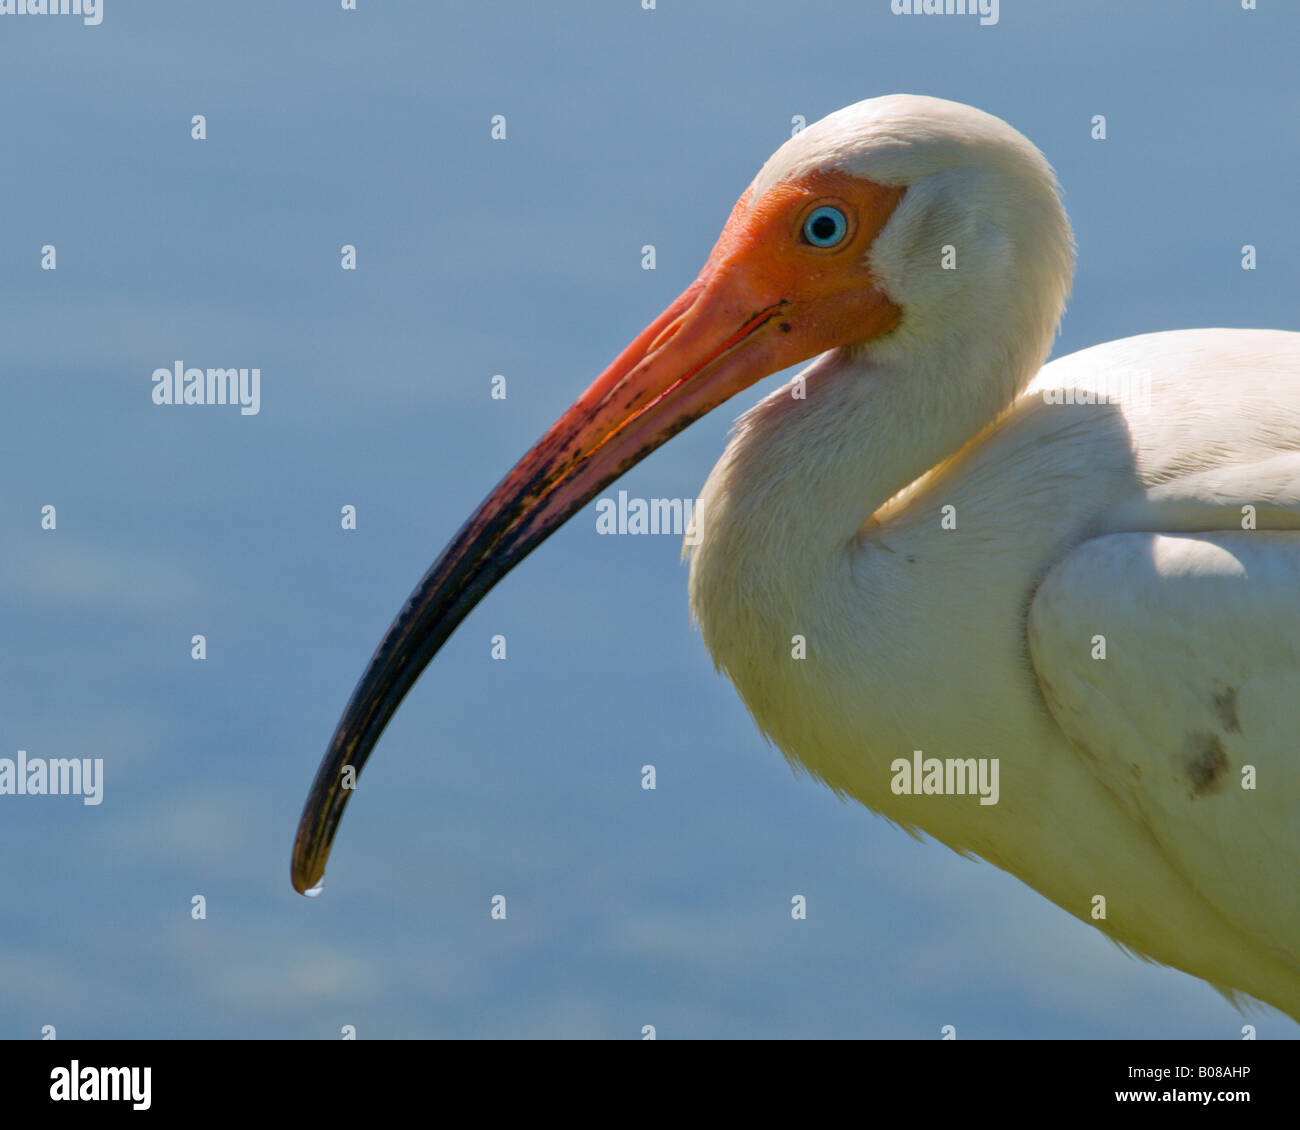 WHITE IBIS DRIES OFF IN THE SPRING SUNSHINE AFTER SEARCHING FOR POLLYWOGS IN THE POND THIS EUDOCIMUS ALBUS LIVESIN FLORIDA Stock Photo